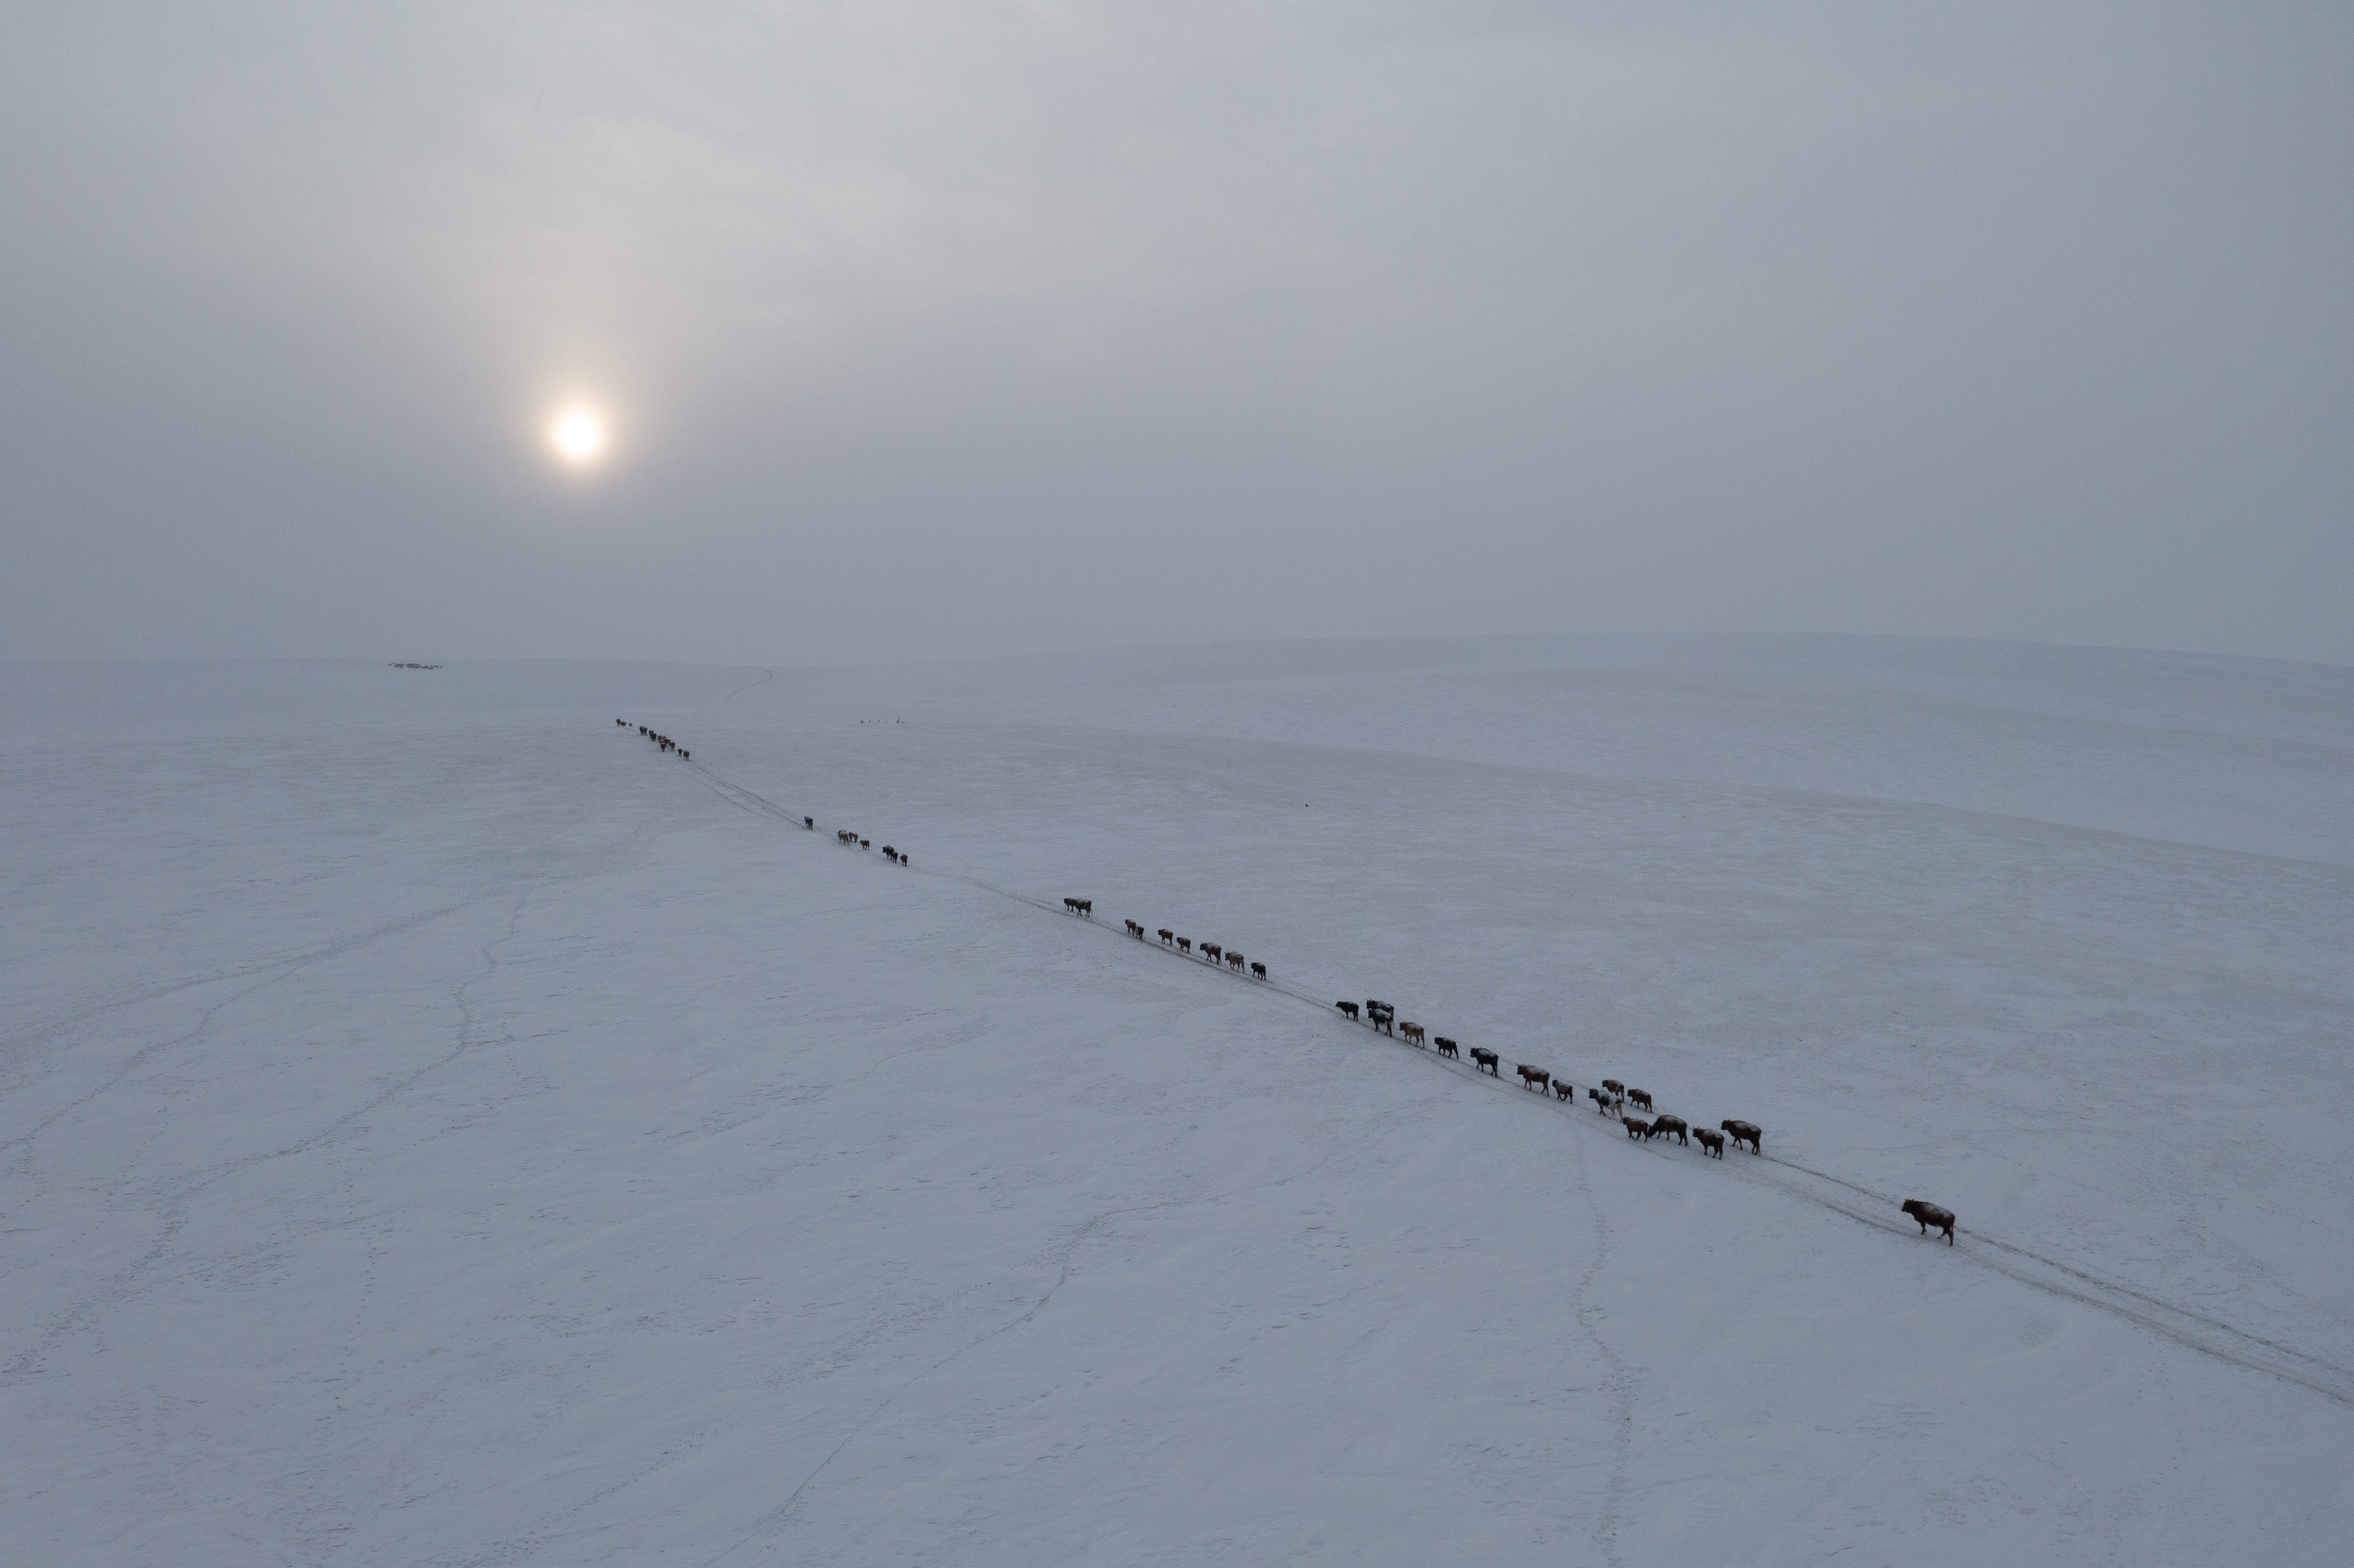 A line of livestock cross a frozen landscape with the setting sun in the distance.